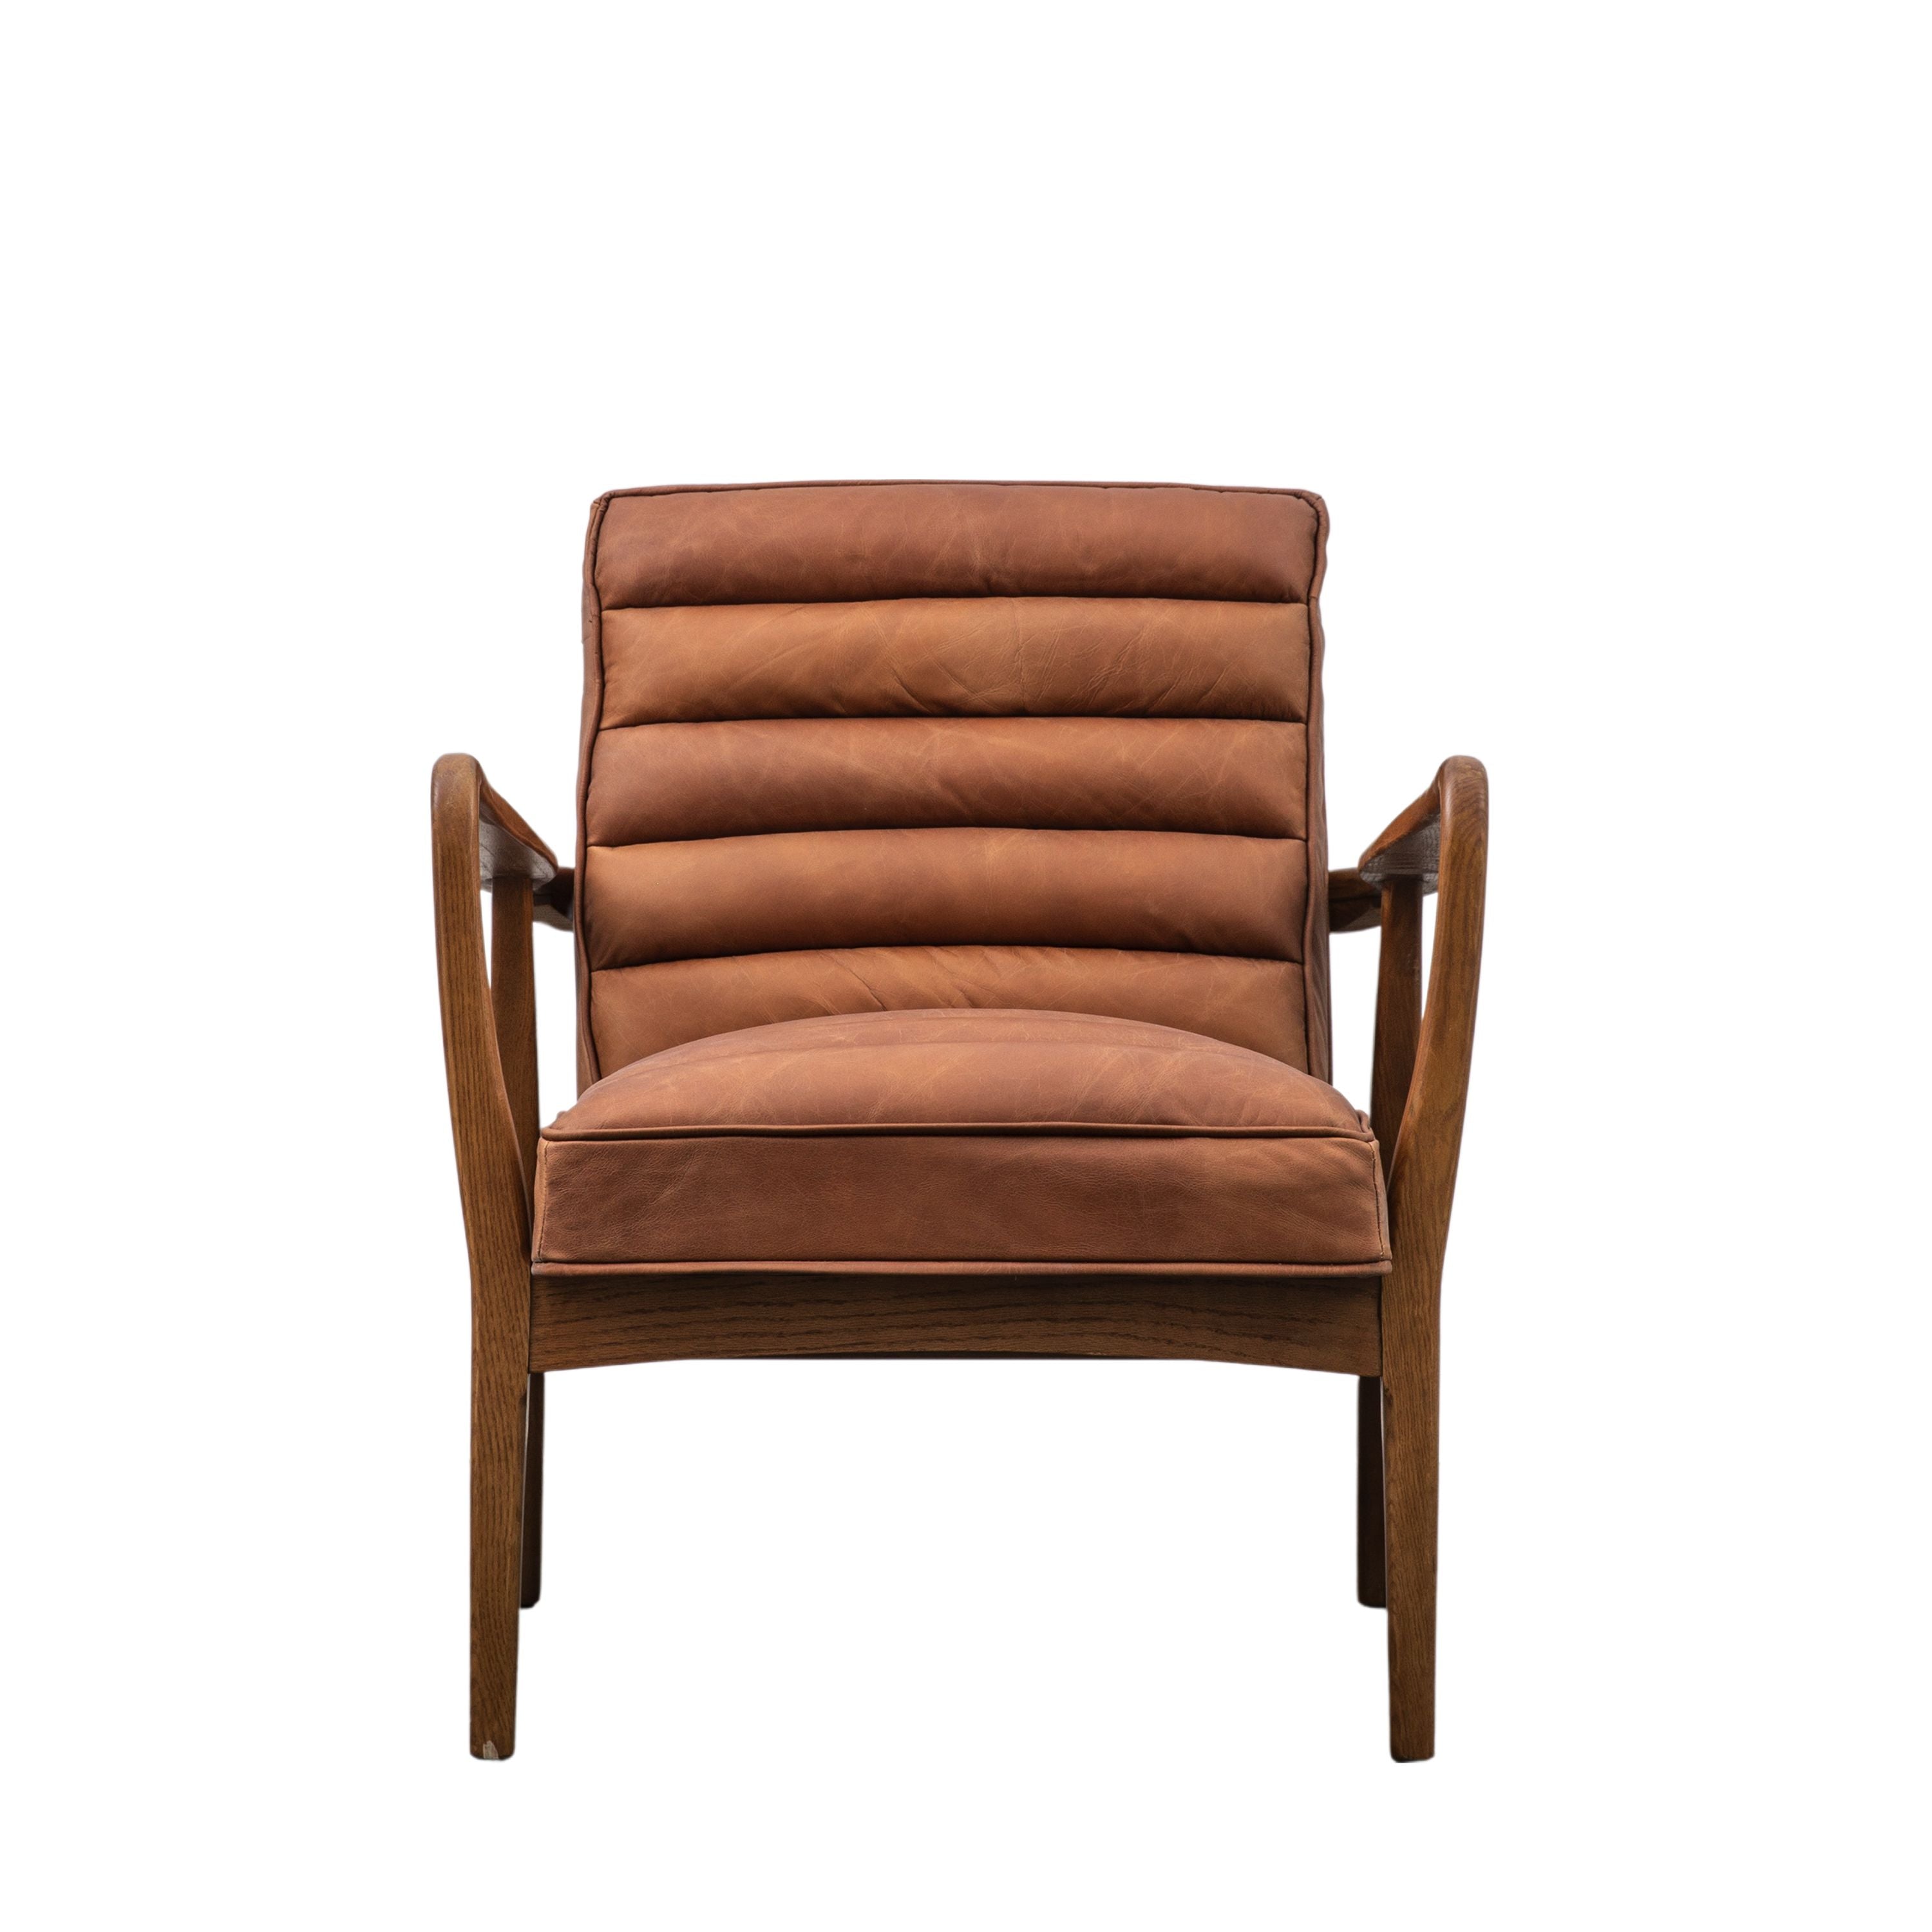 Cruzo Armchair Vintage Brown Leather with Wooden Legs - Maison Rêves UK